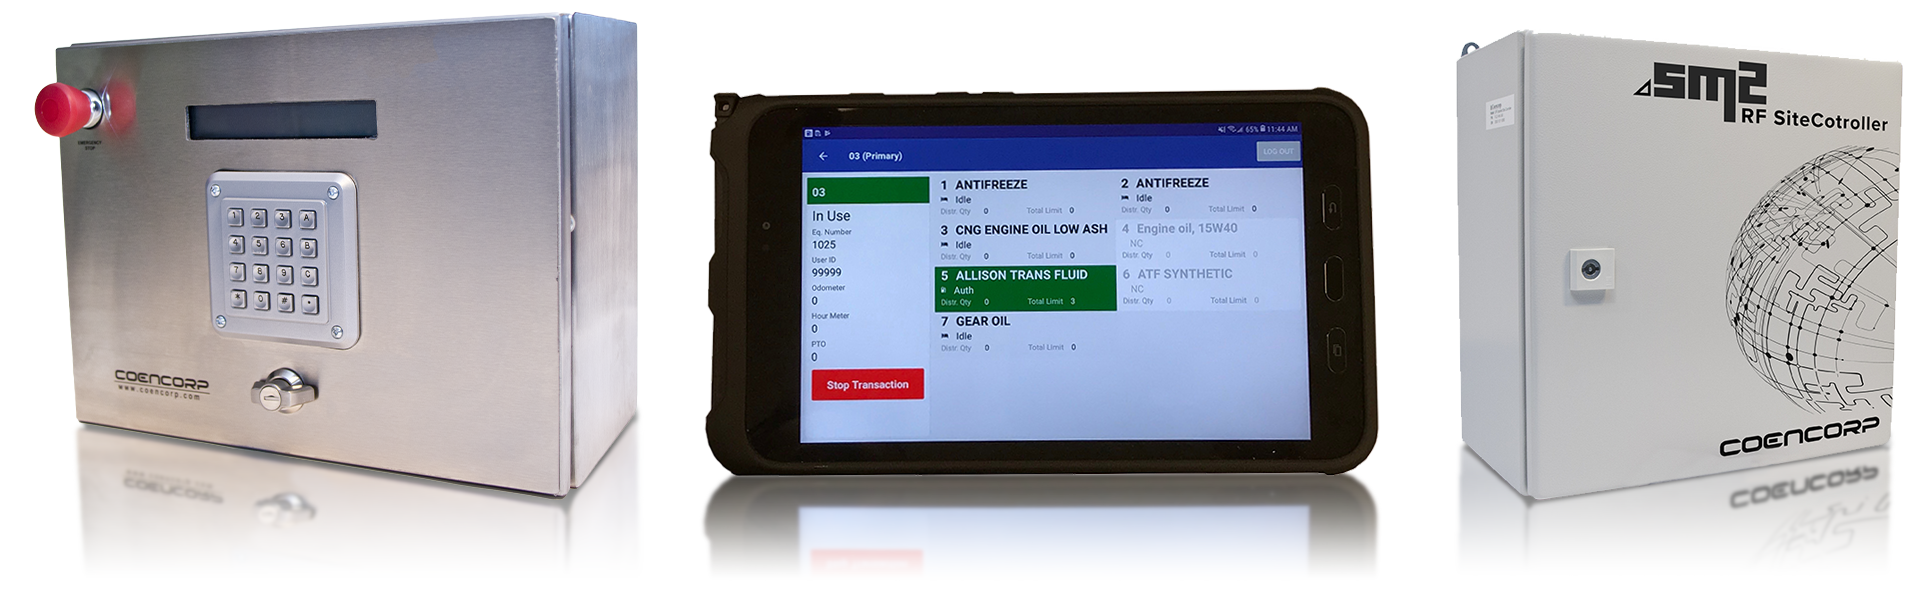 Coencorp SM2 Fuel Island Terminal beside a Tablet Terminal and Site Controller making up the industry's most advanced Fleet Fuel Management Hardware